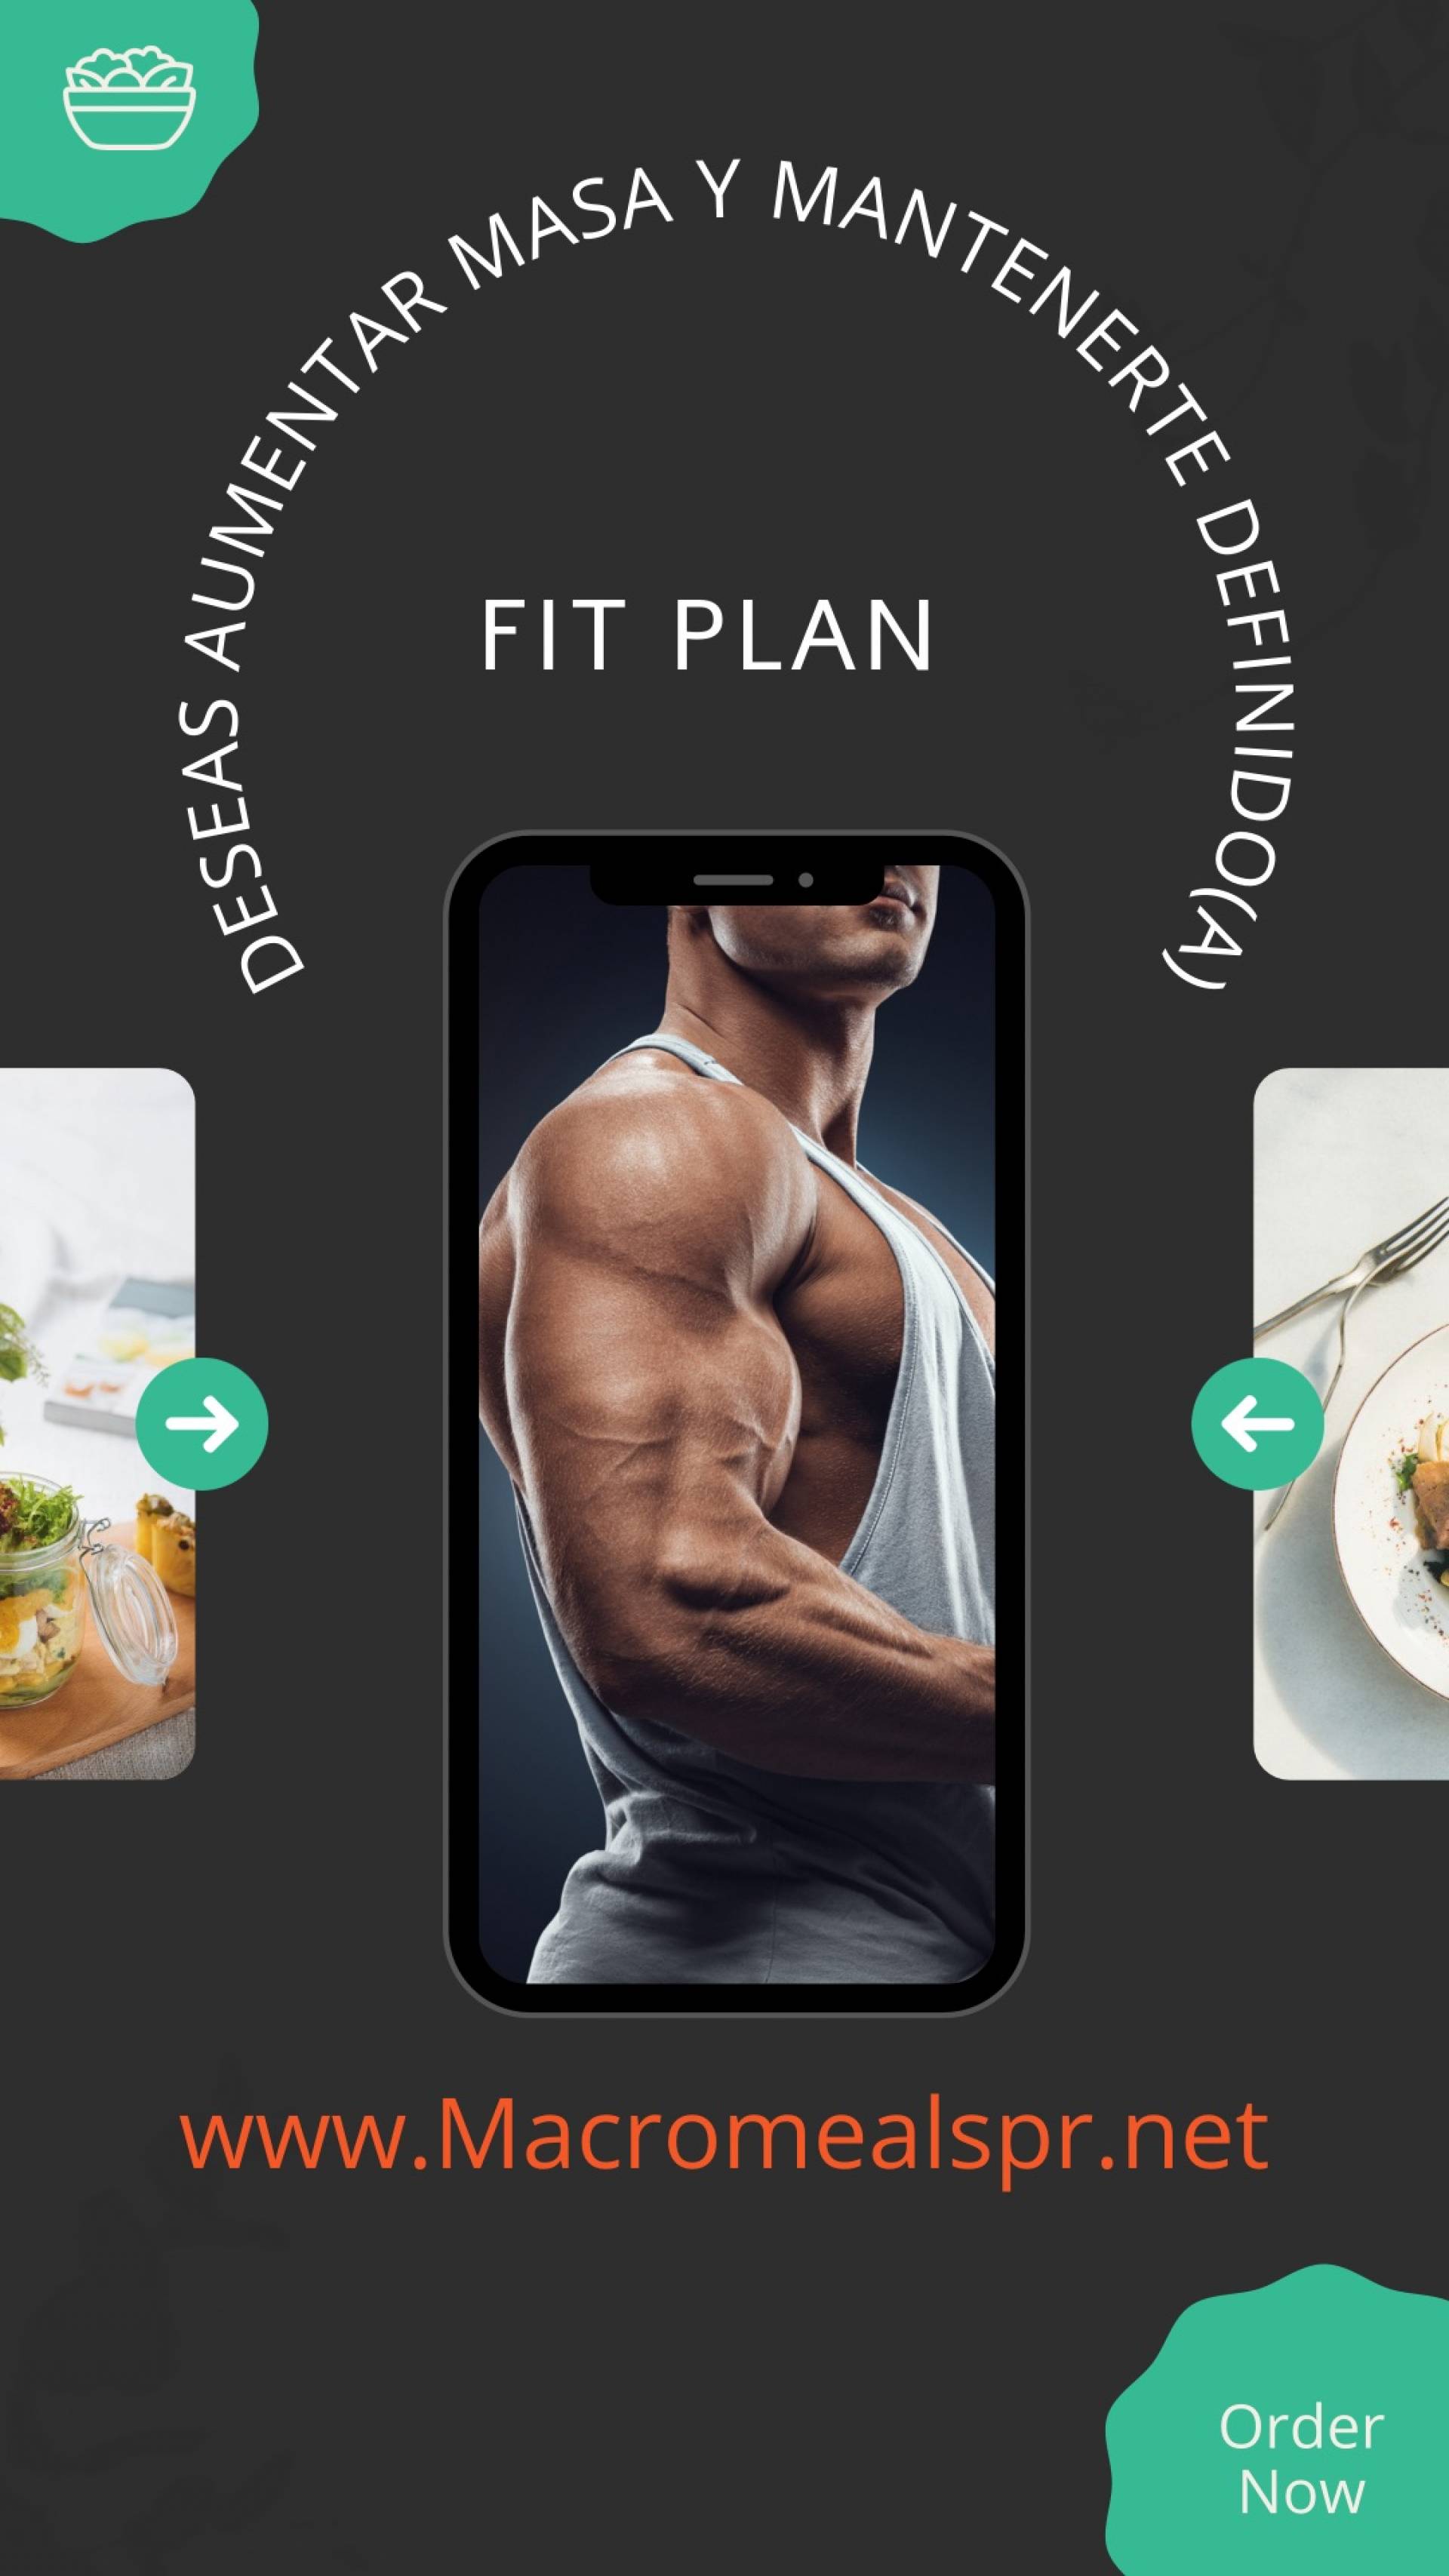 FIT PLAN 10 MEALS-BUILD MUSCLES 8OZ PROTEIN 6OZ CARBS